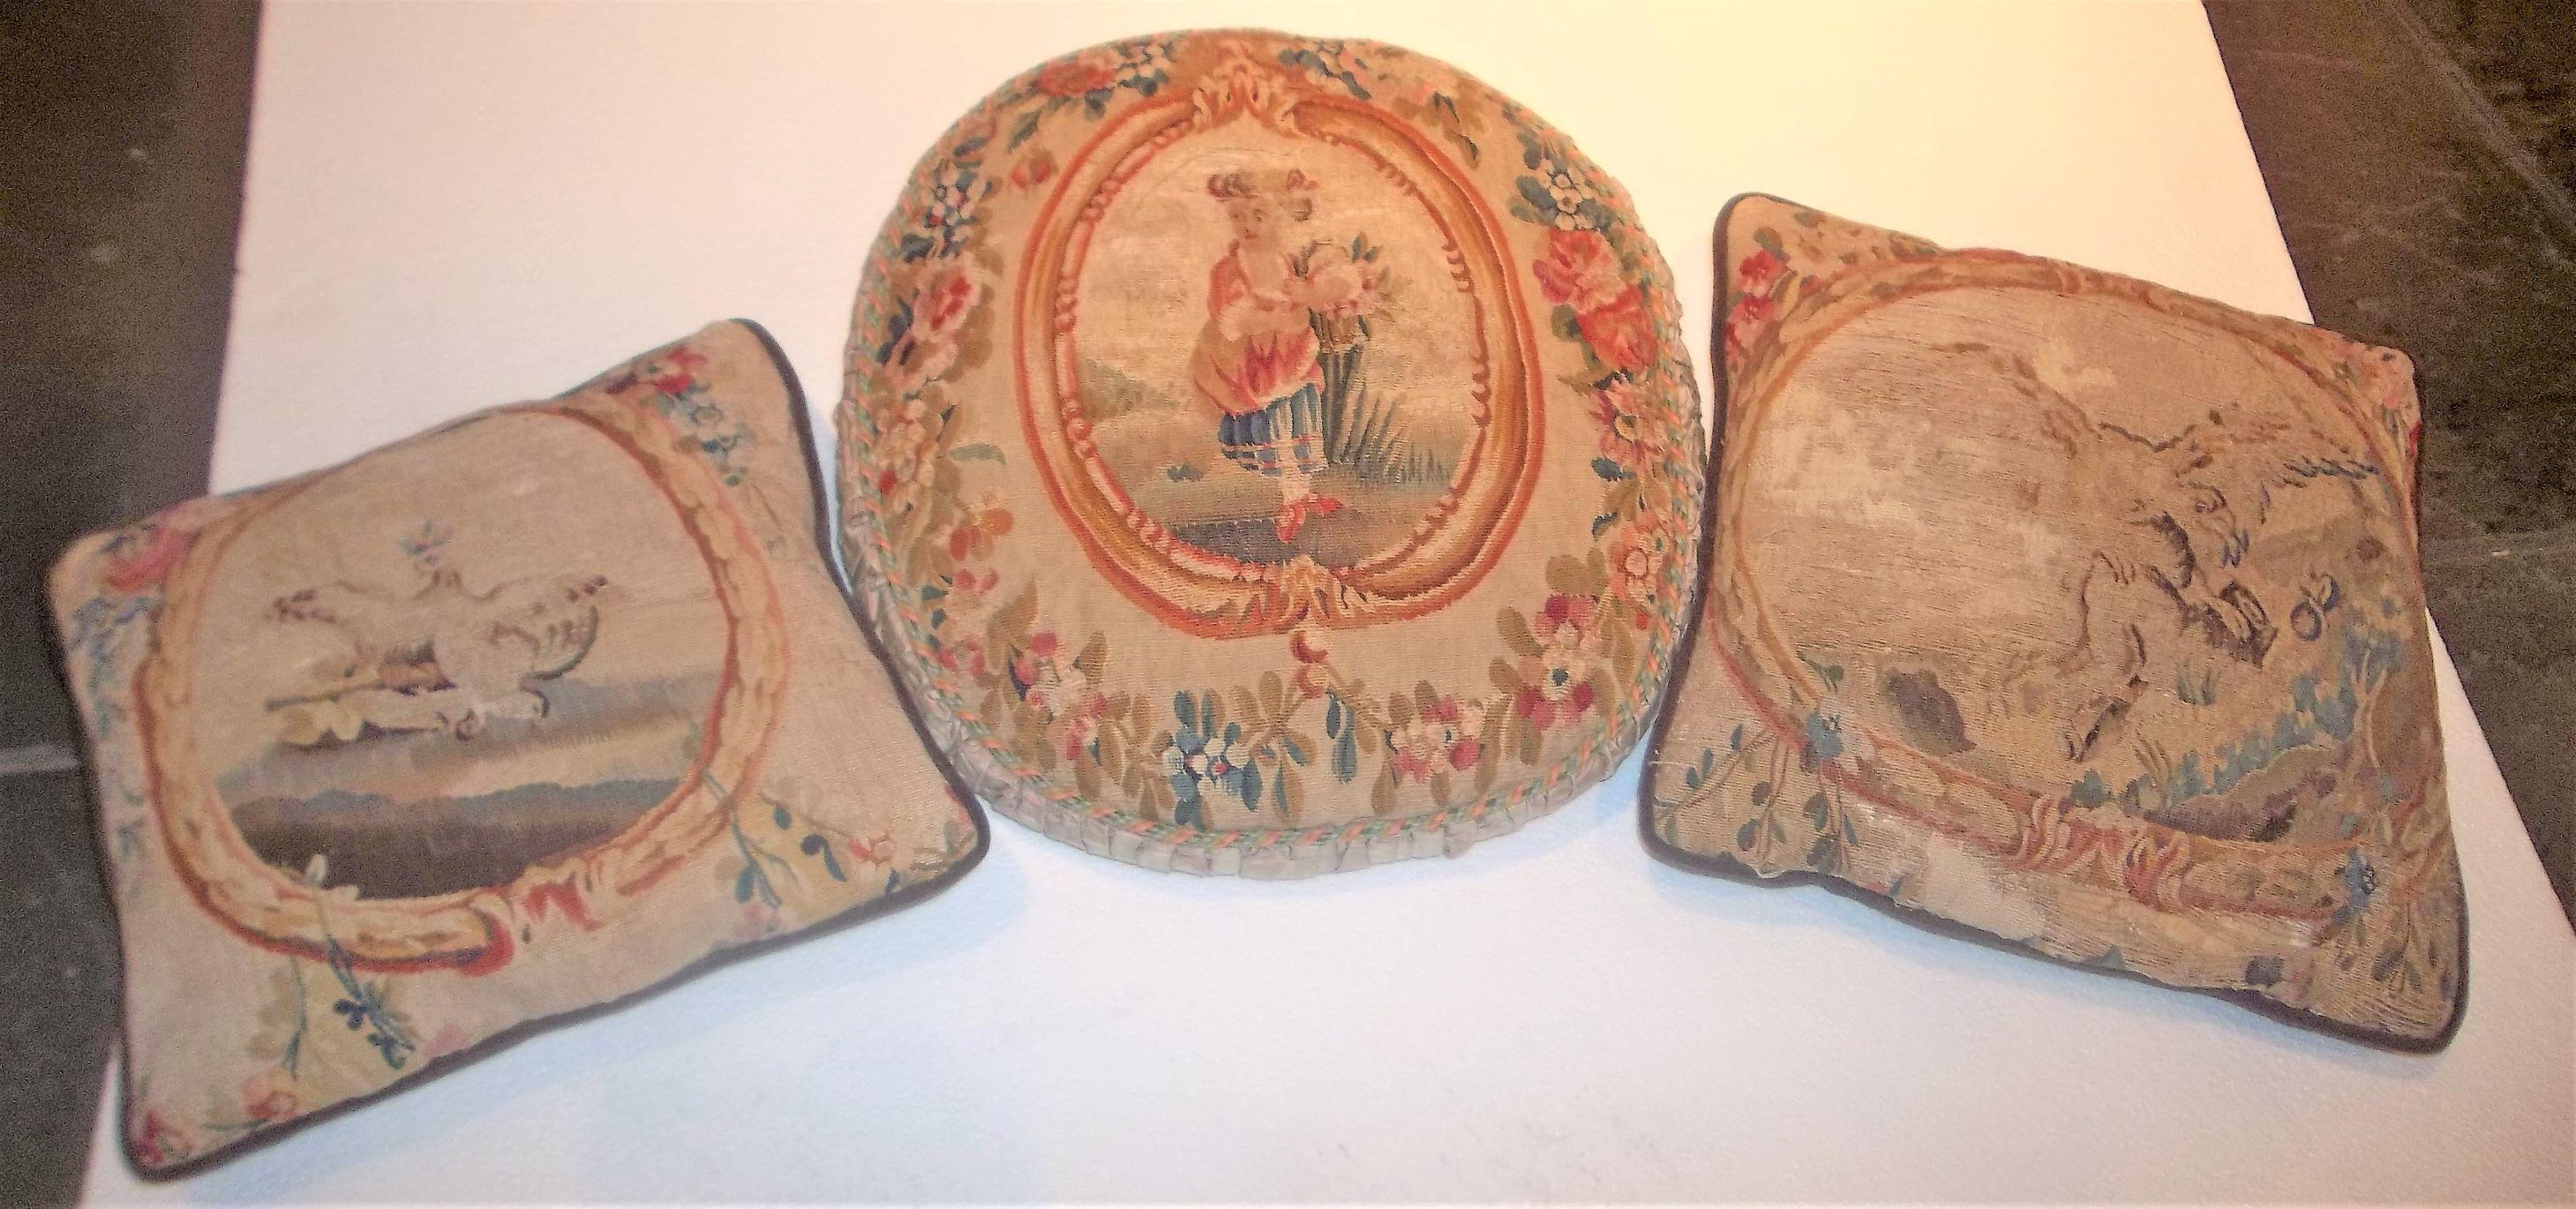 Ignore the 1stdibs freight quote , these Will ship UPS free

Possibly from the same set of Salon furniture. Colorful floral borders with central figural scenes. 

The oval with a girl and a basket of flowers measures 18 inches by 16 inches
A square